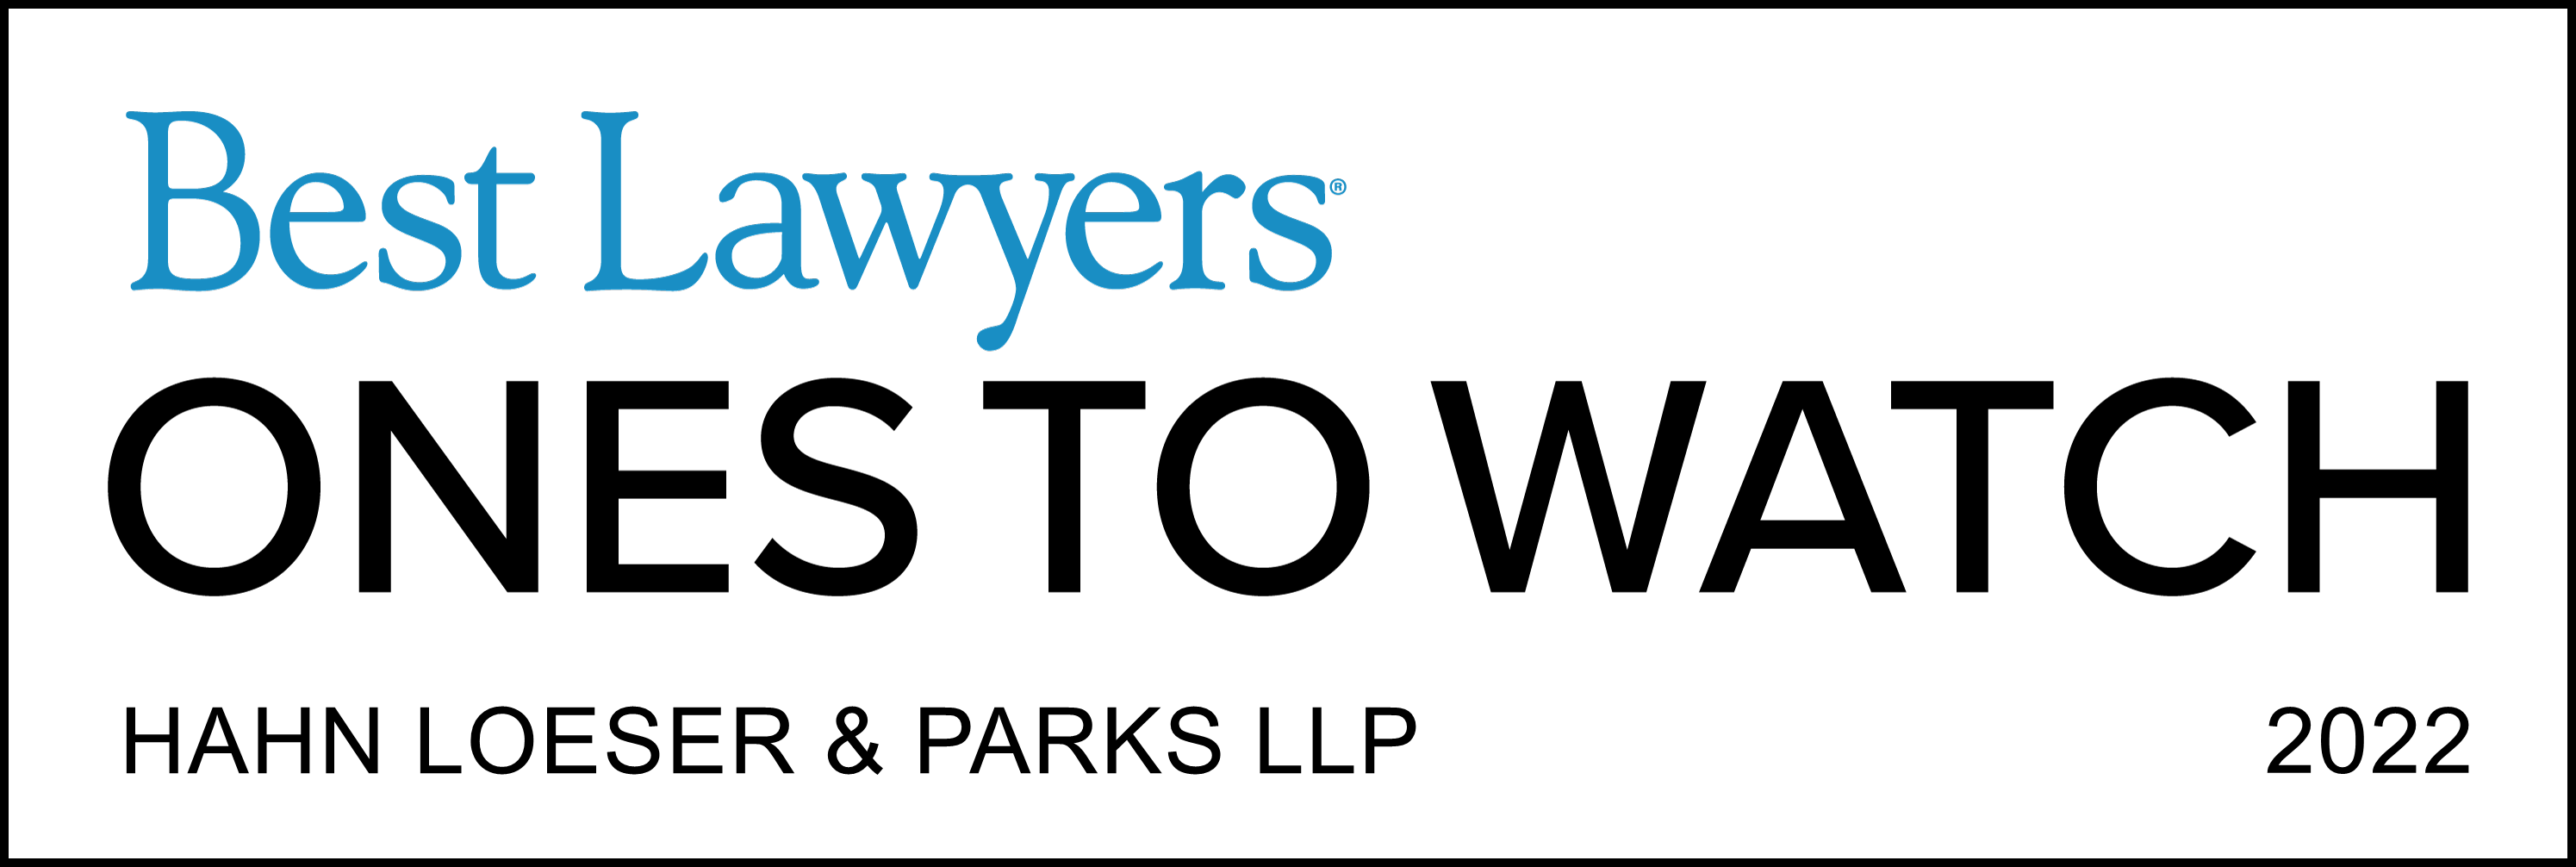 Best Lawyers Ones To Watch - Hahn Loeser & Parks LLP